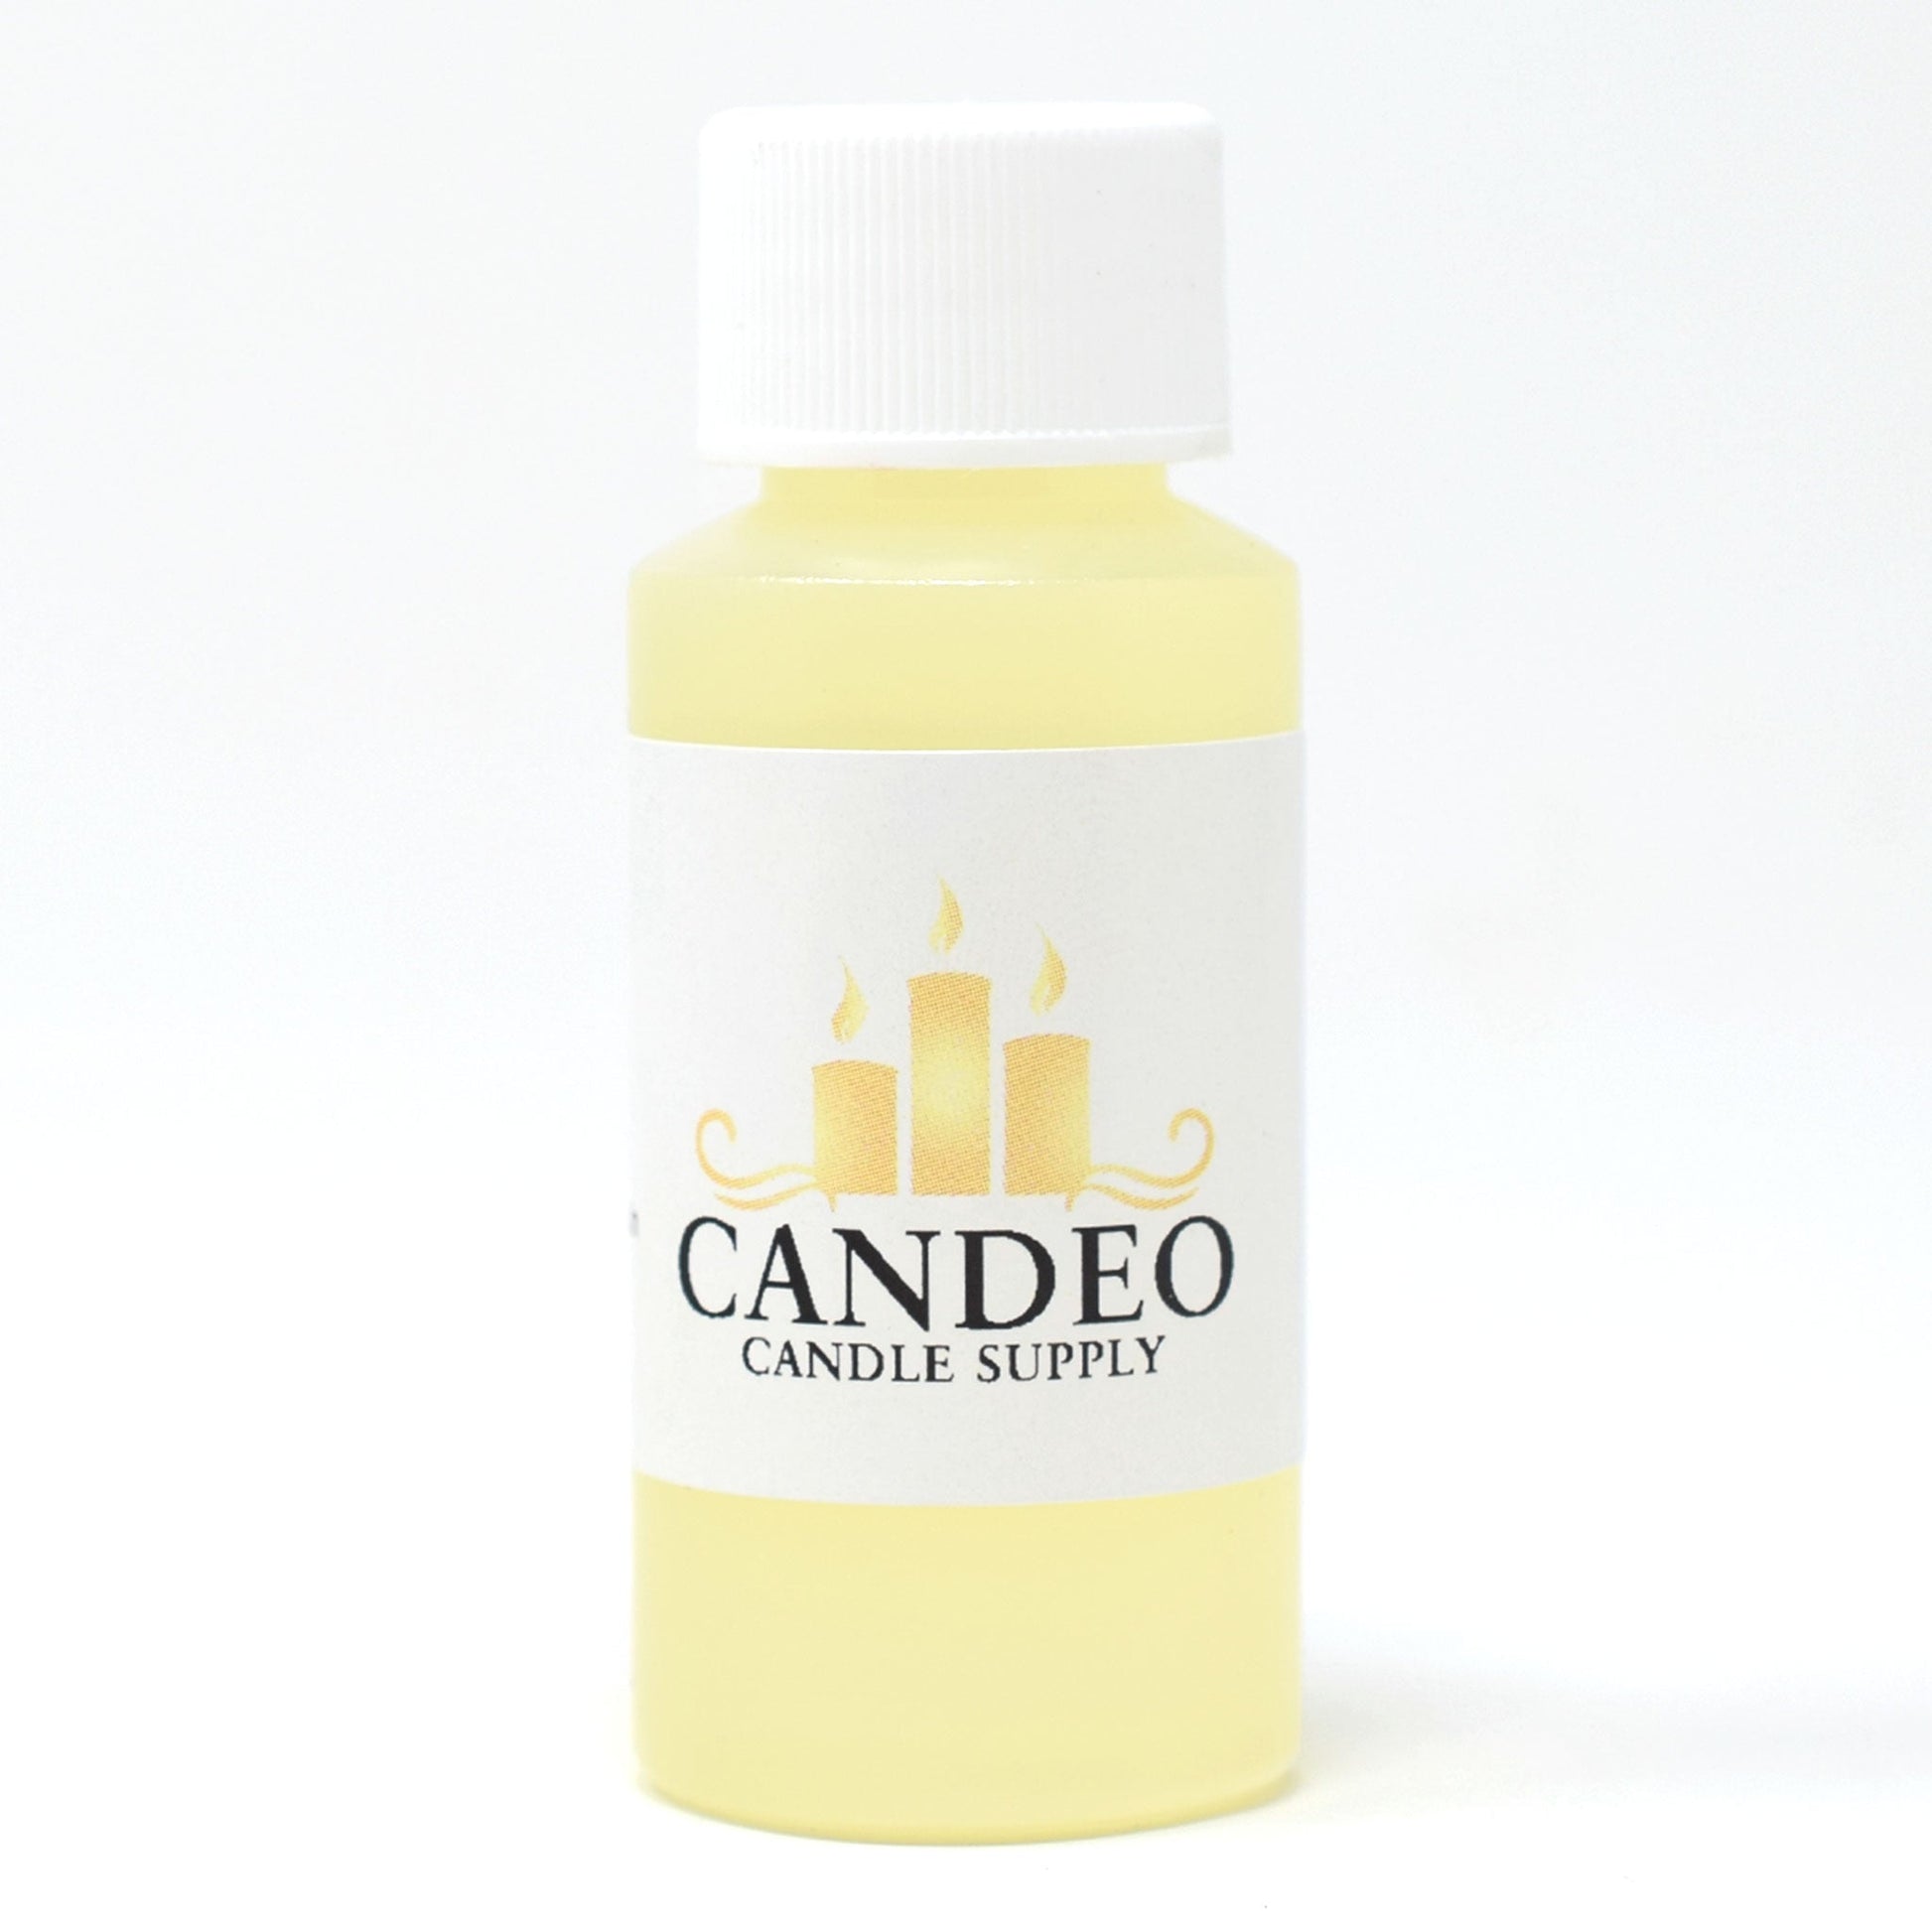 Oakmoss & Amber Fragrance Oil - Candeo Candle Supply